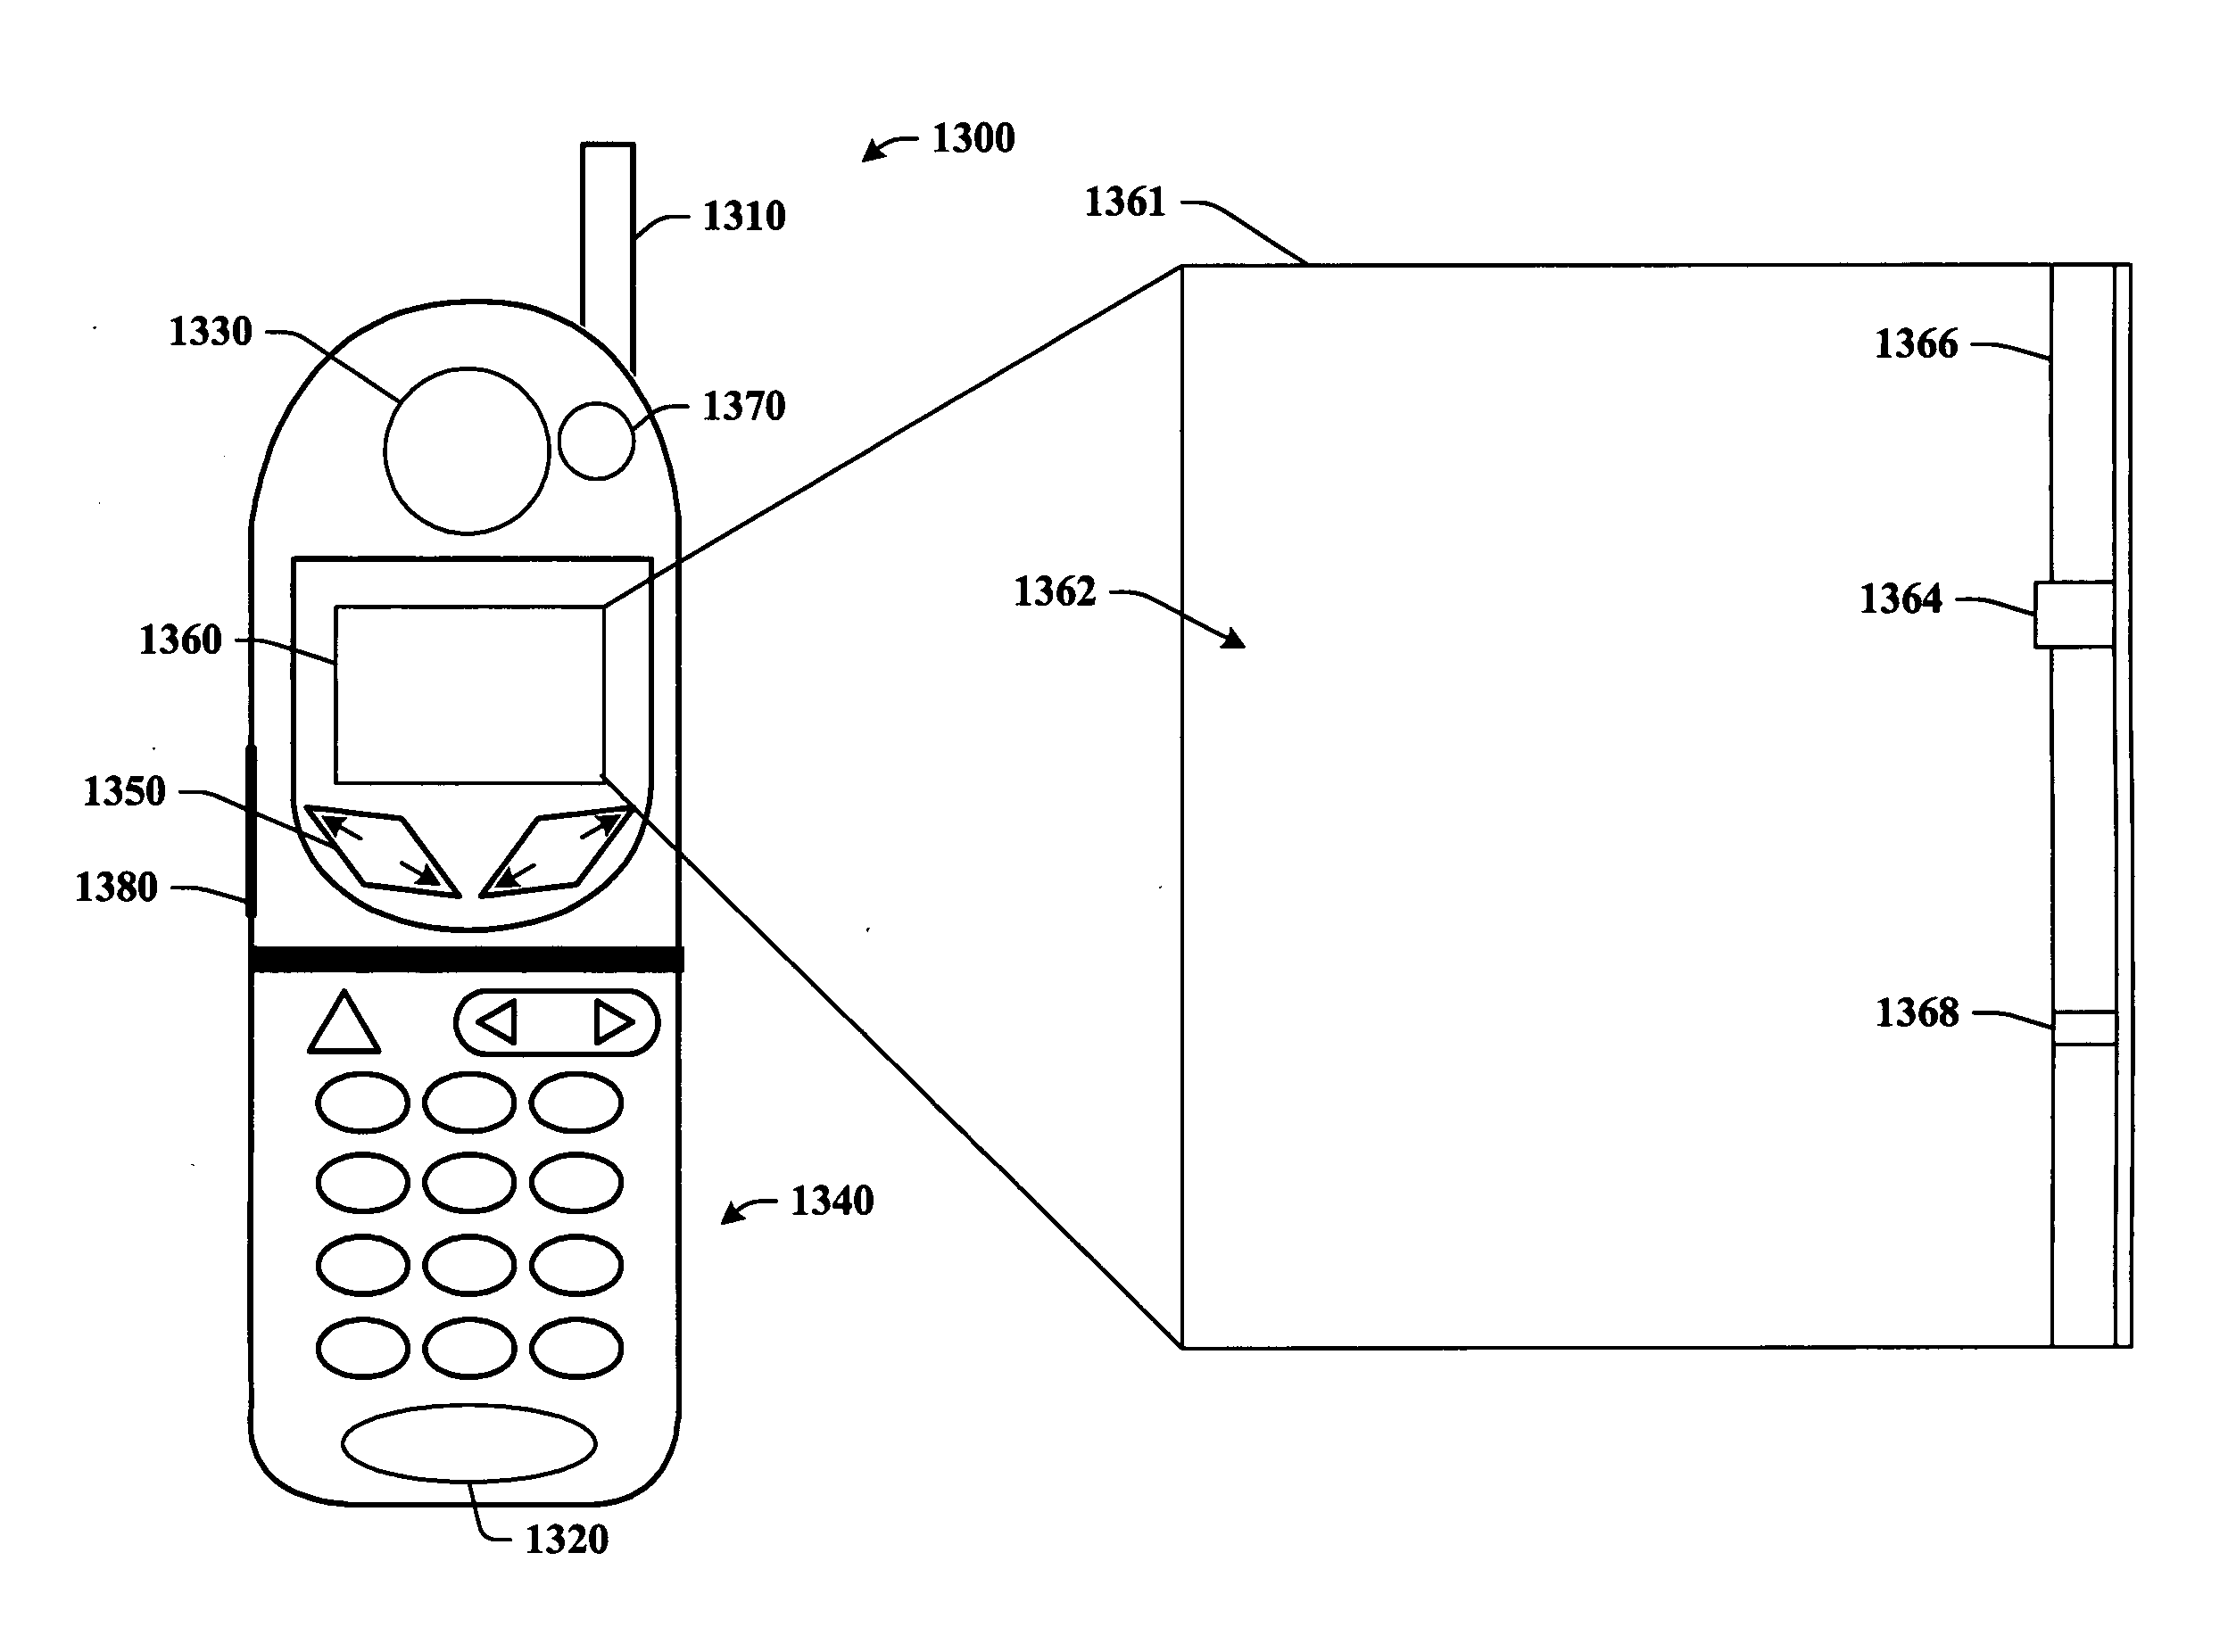 Dynamically tuned antenna used for multiple purposes